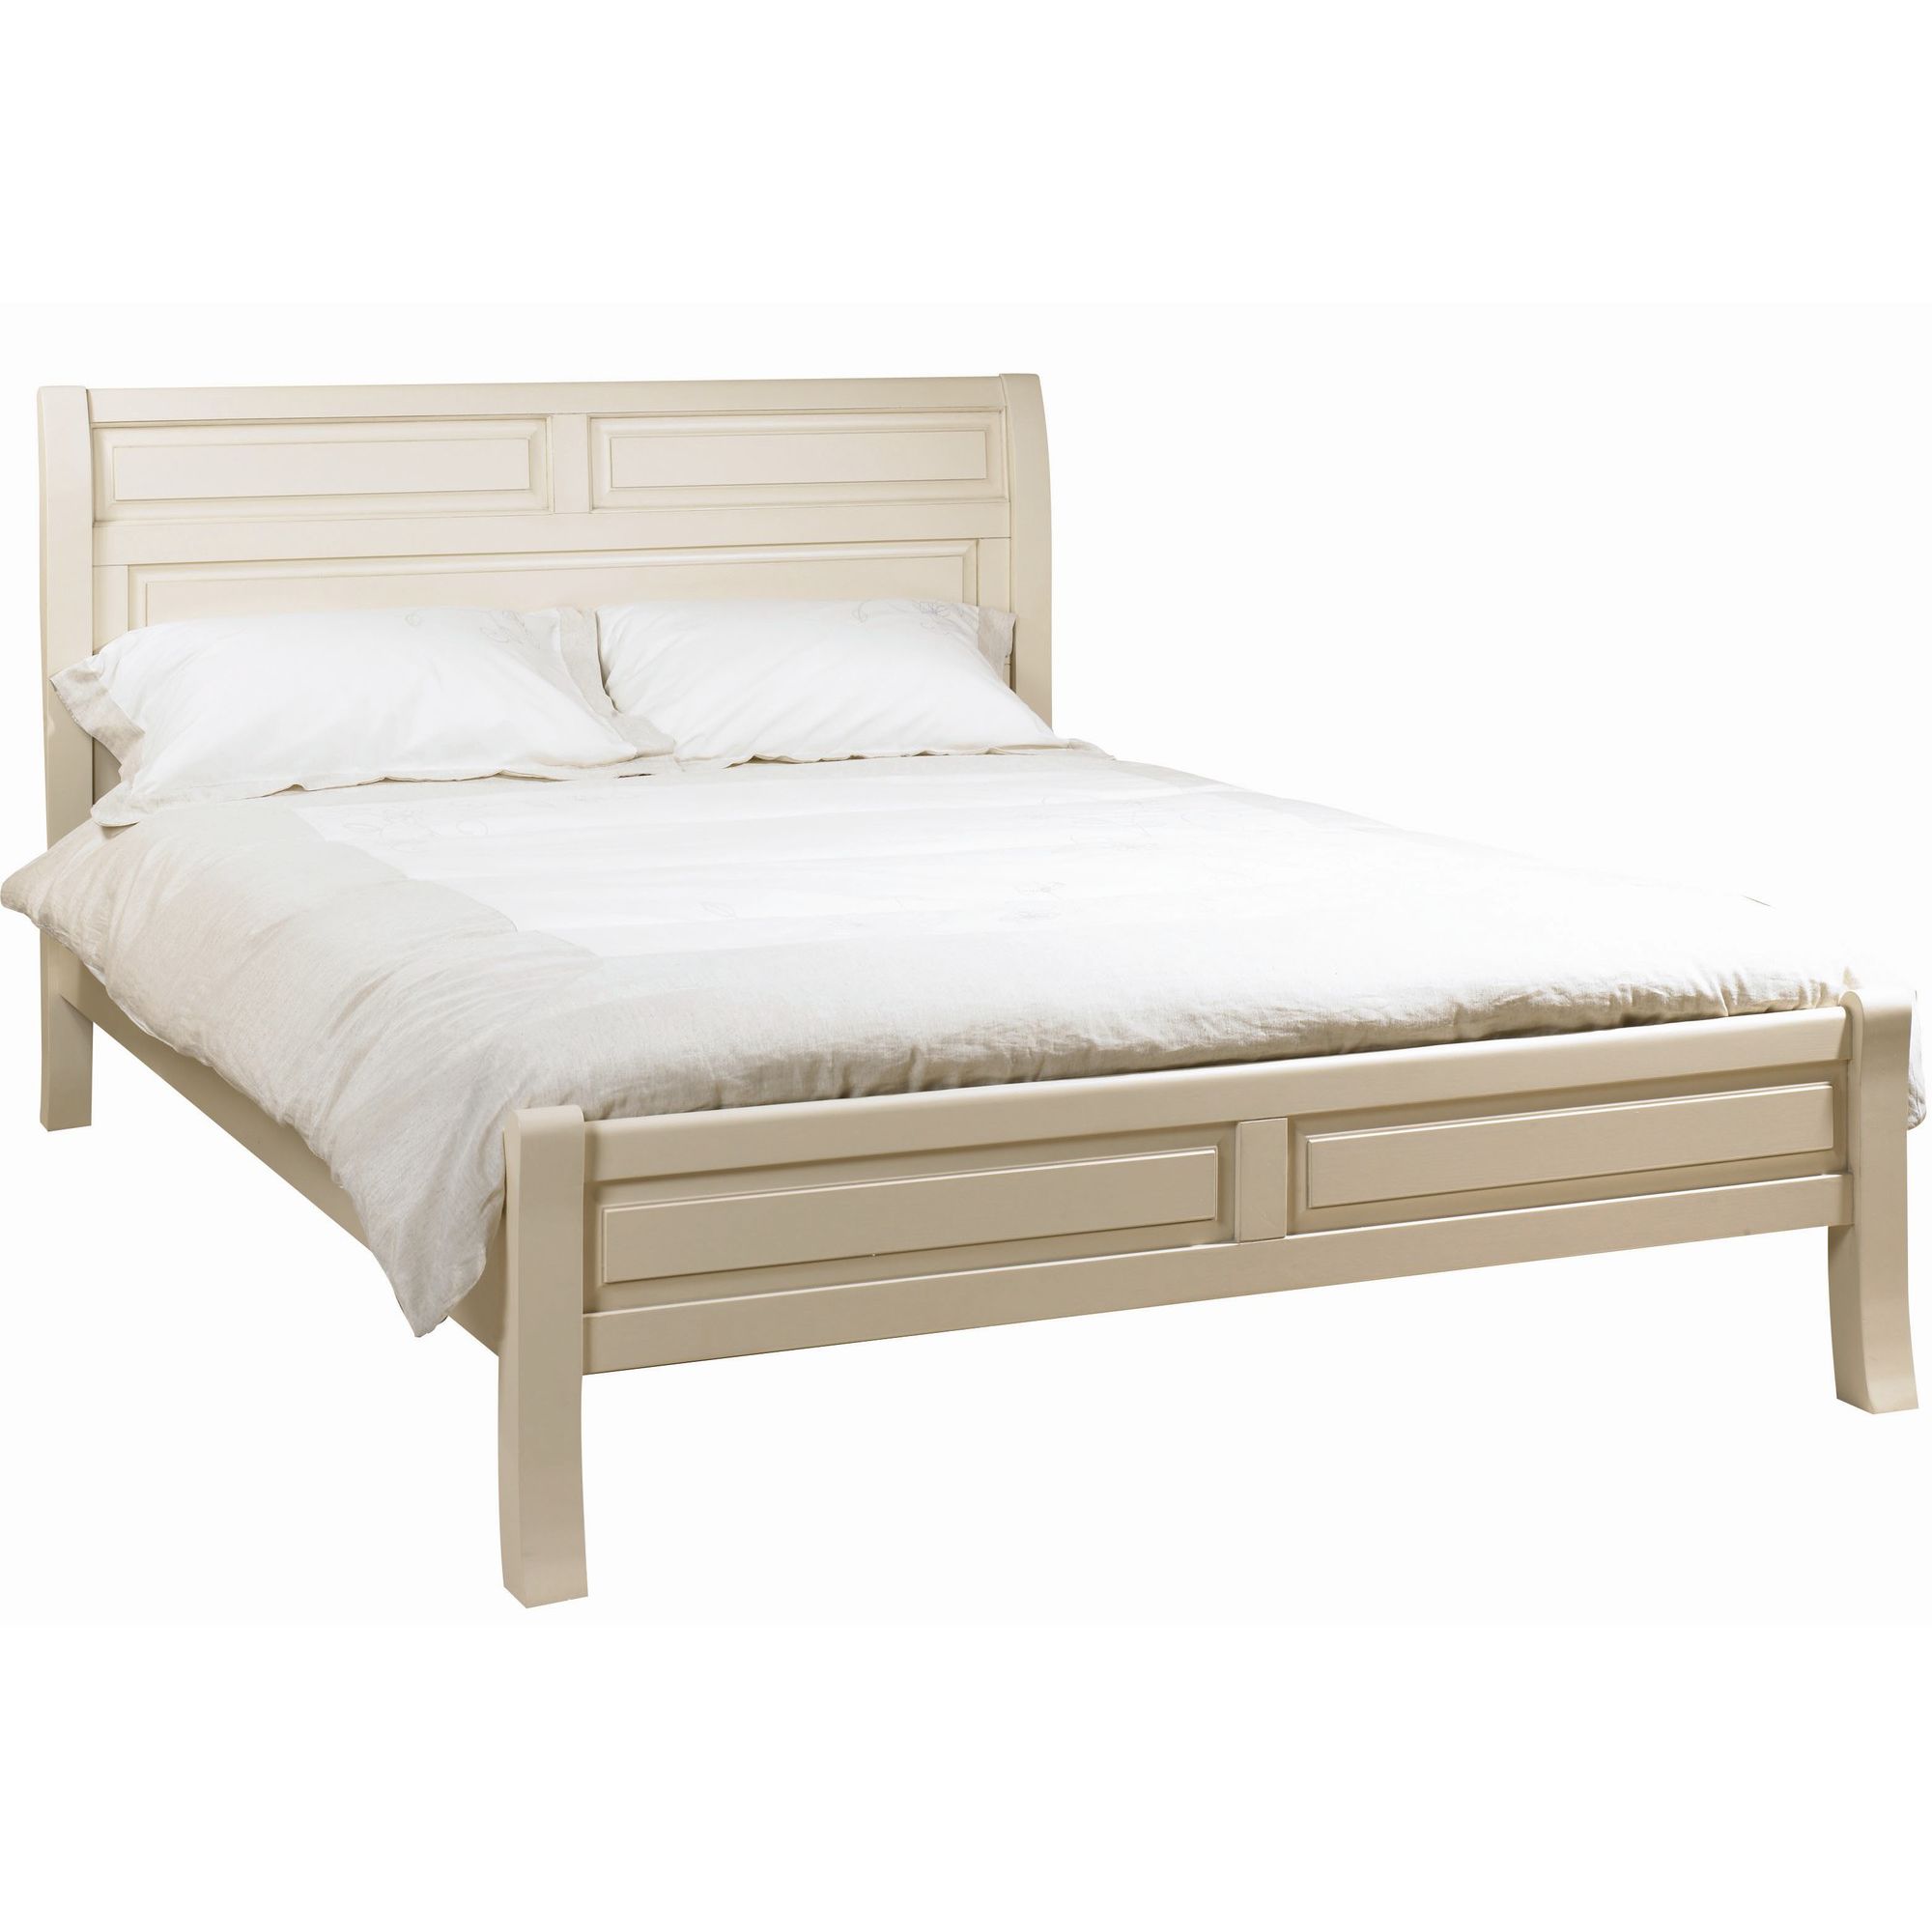 YP Furniture Country House Bedstead including Headboard and Footboard - Double at Tesco Direct